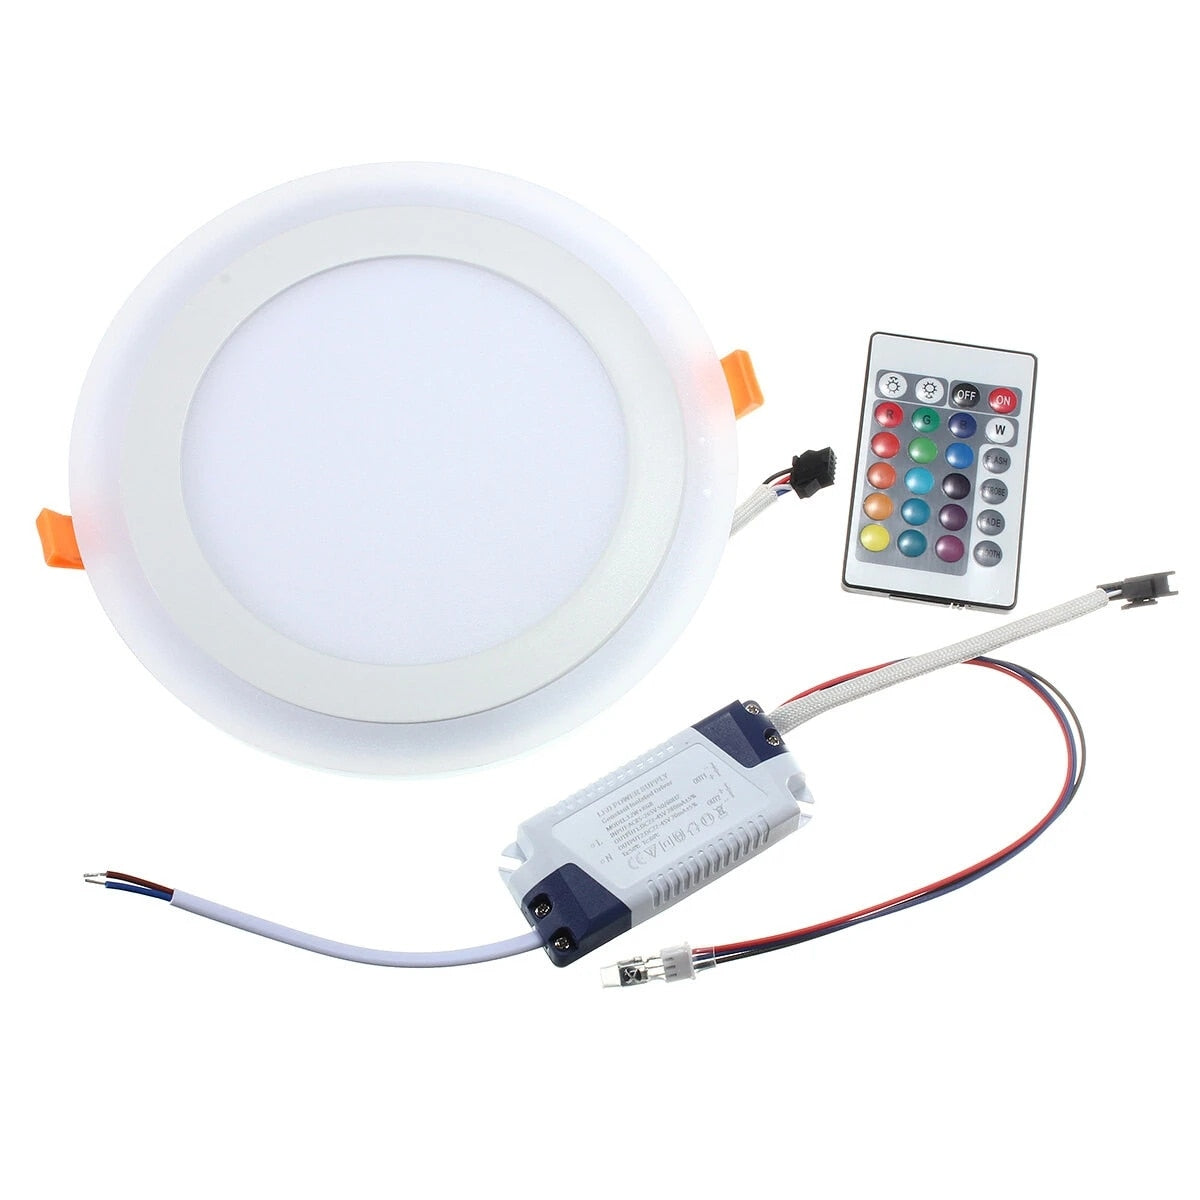 LED Panel light Round  Downlight RGB & white/warm Ceiling Recessed with Remote Control 6W - 24W 3 Model LED Lamp Double Color